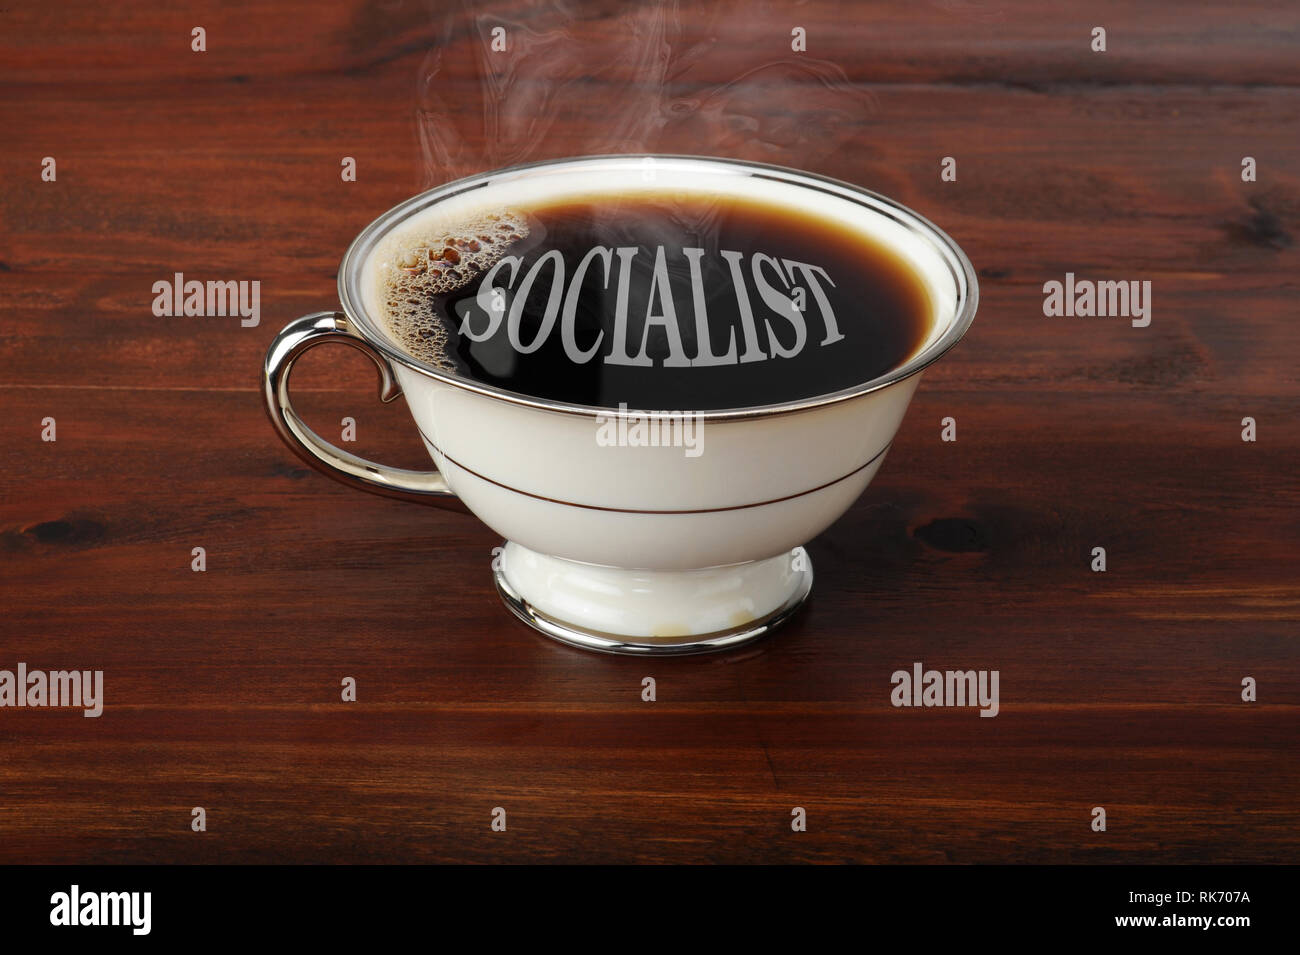 Hot fresh Socialist black coffee ready to start the day. Stock Photo